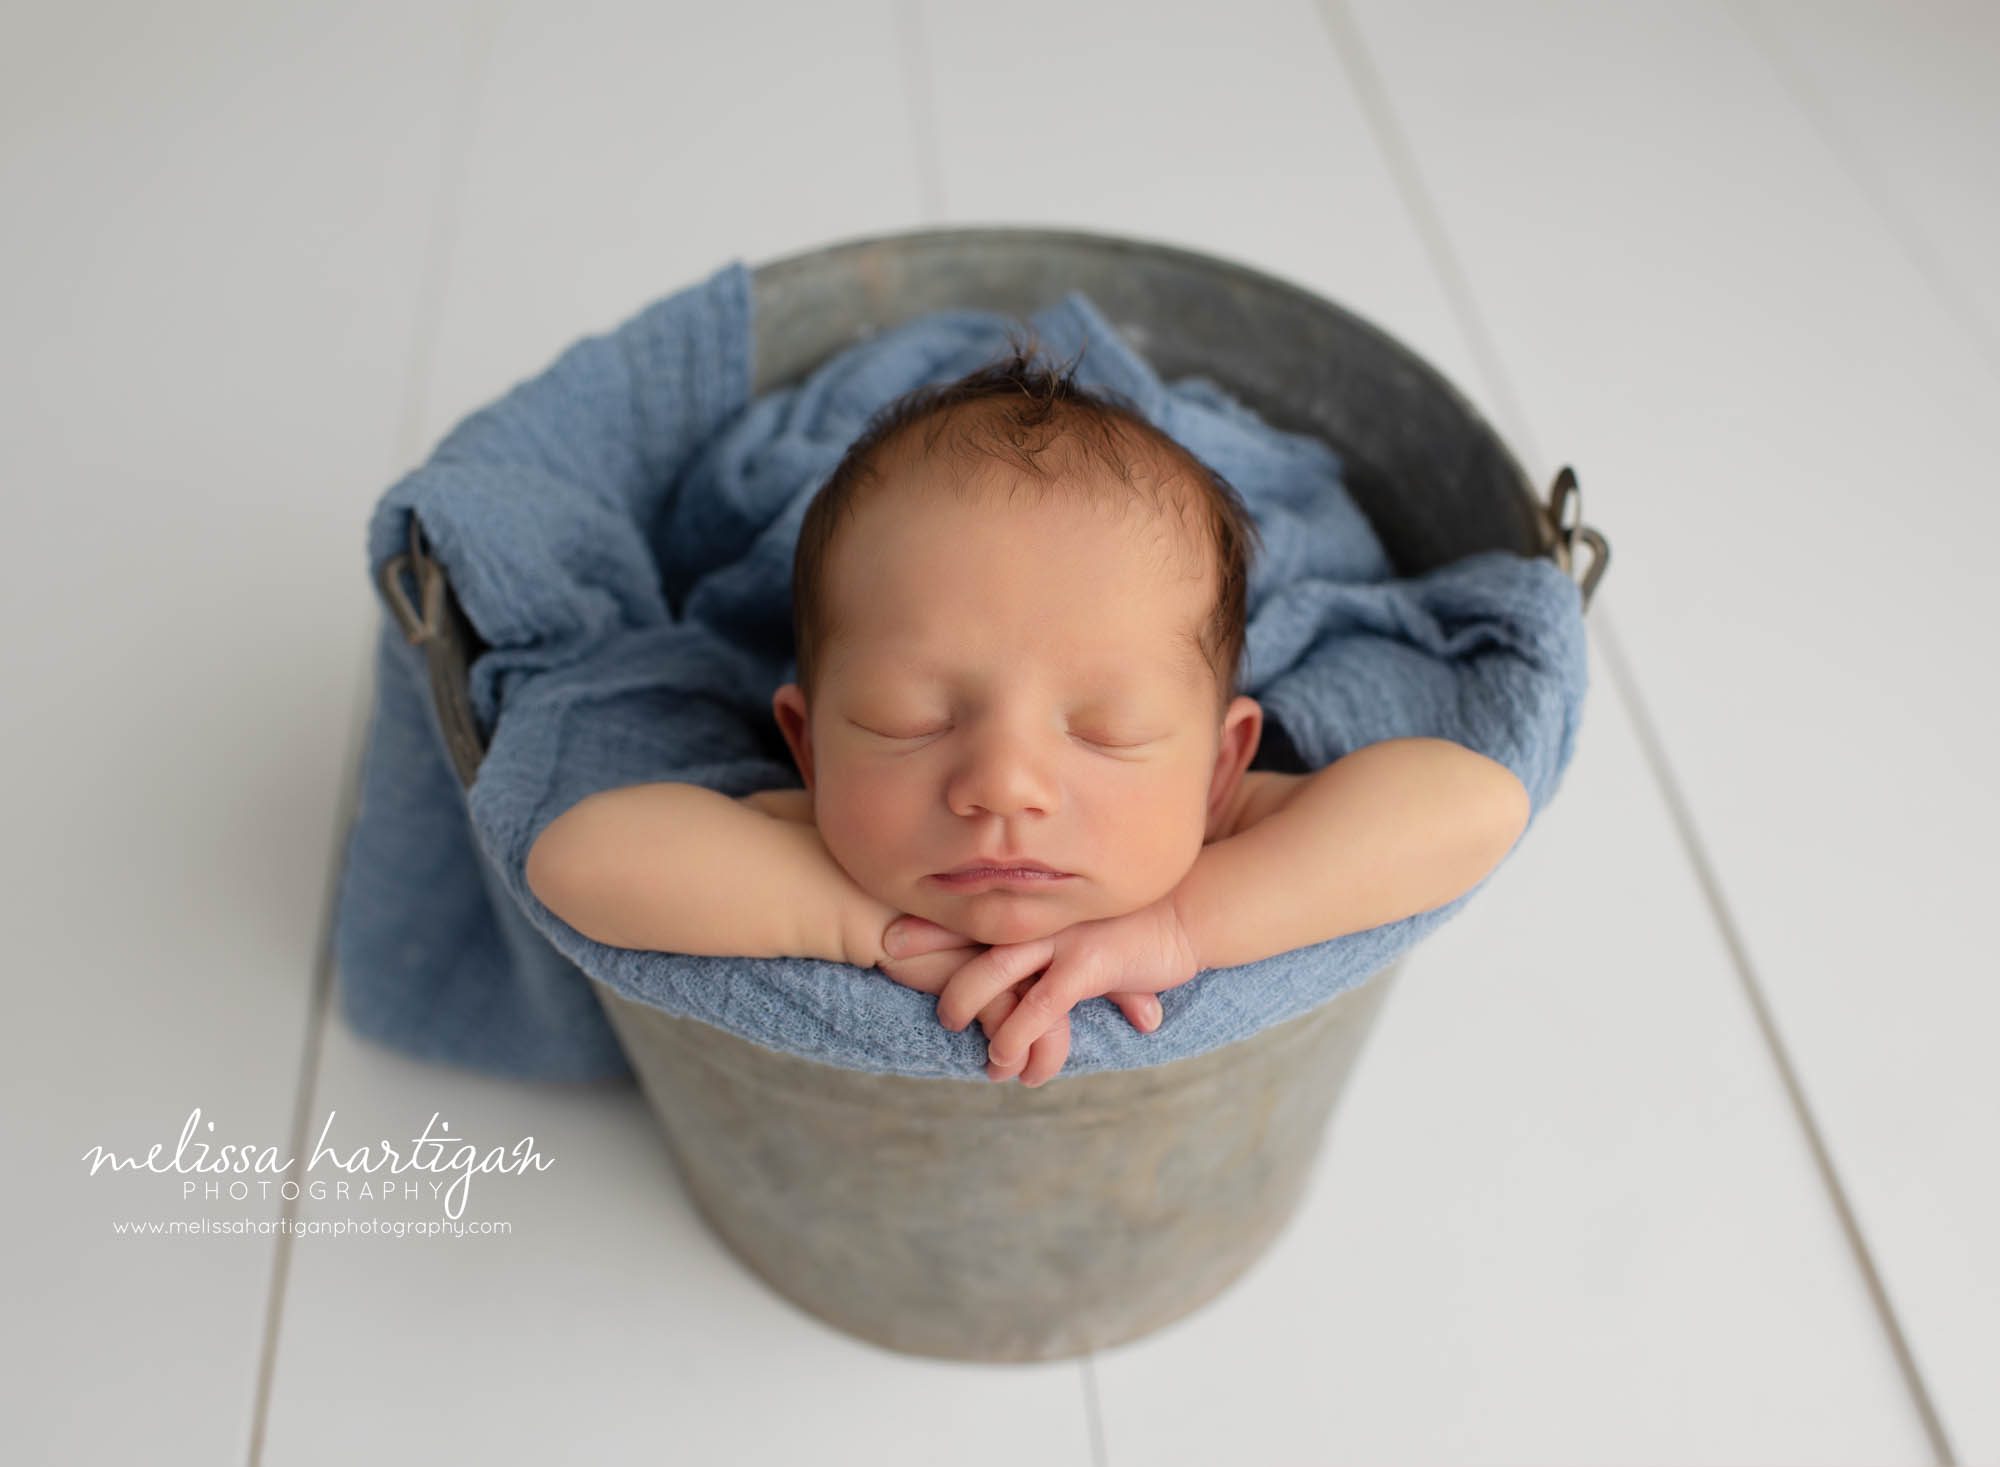 baby boy posed in metal bucket with head on hands